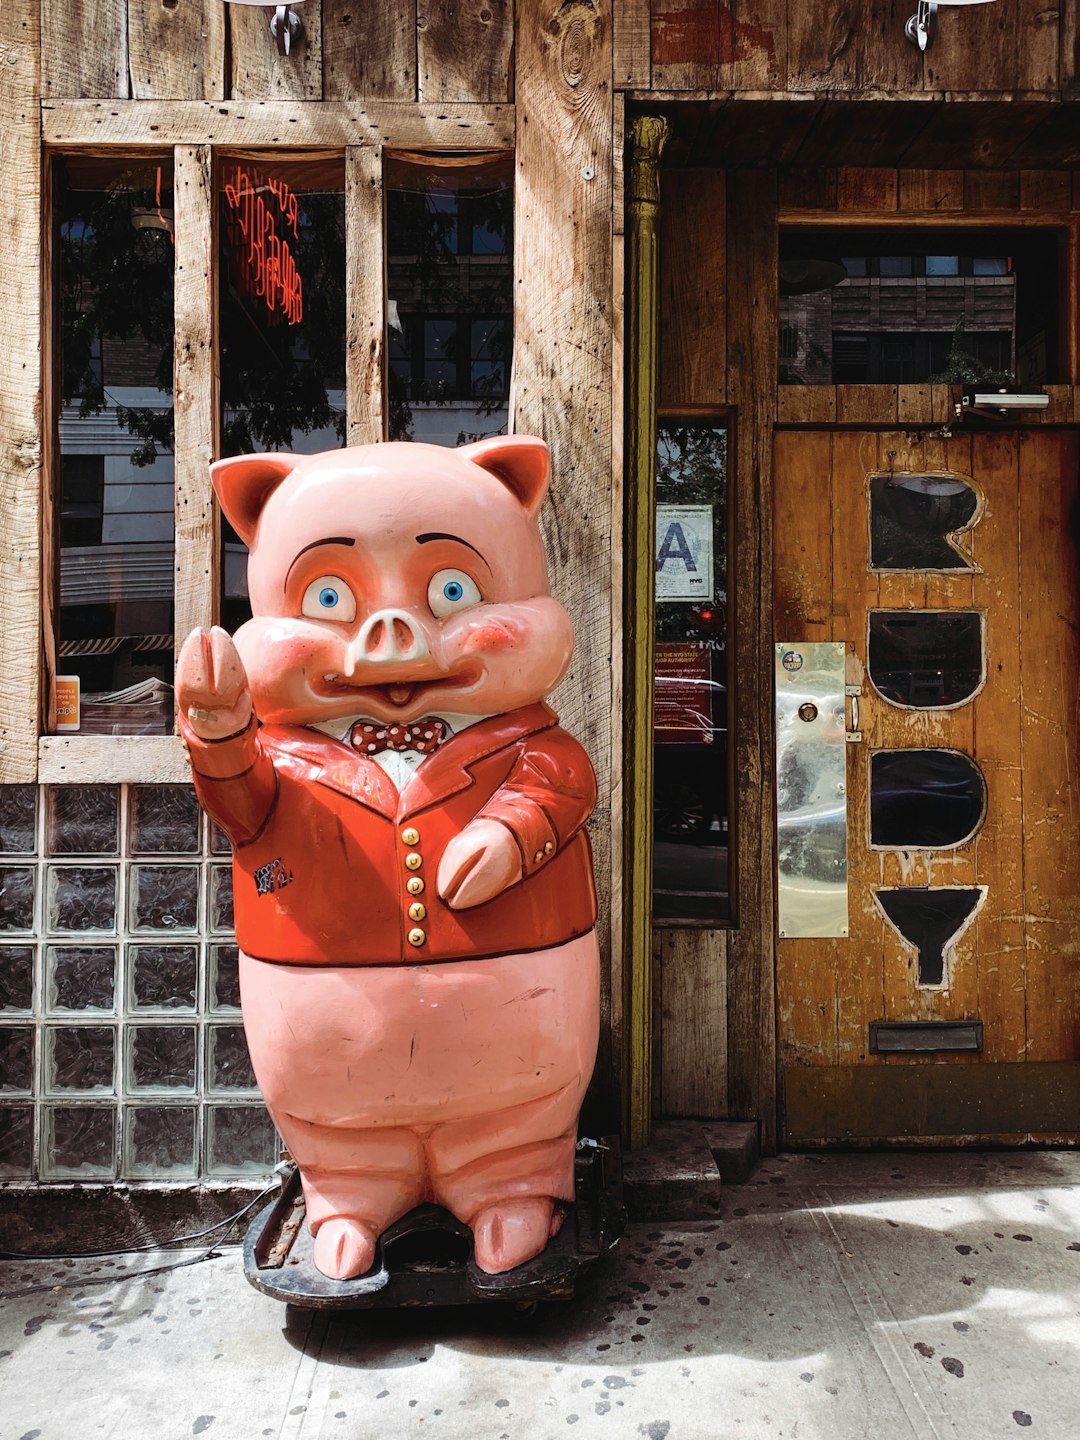 pink pig statue near brown wooden house